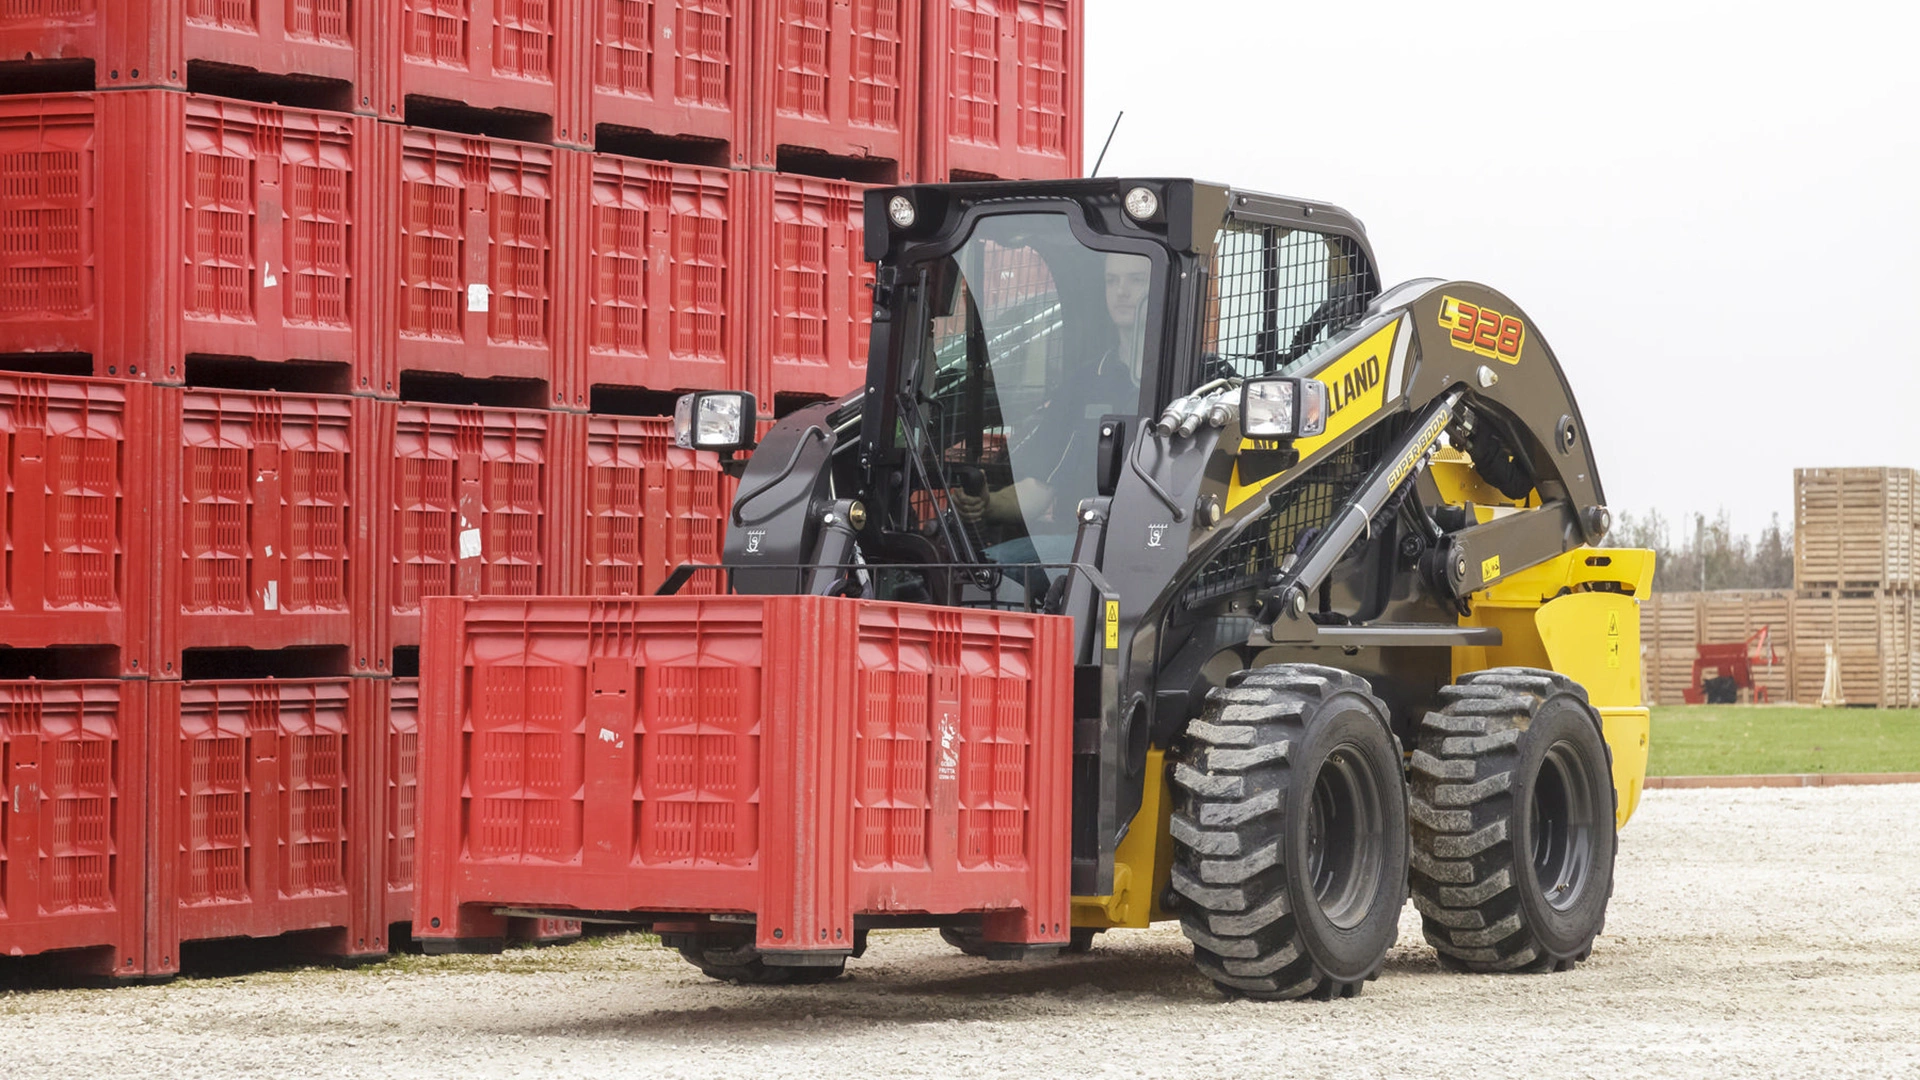 New Holland Skid Steer Loader stacking red crates outside a warehouse.